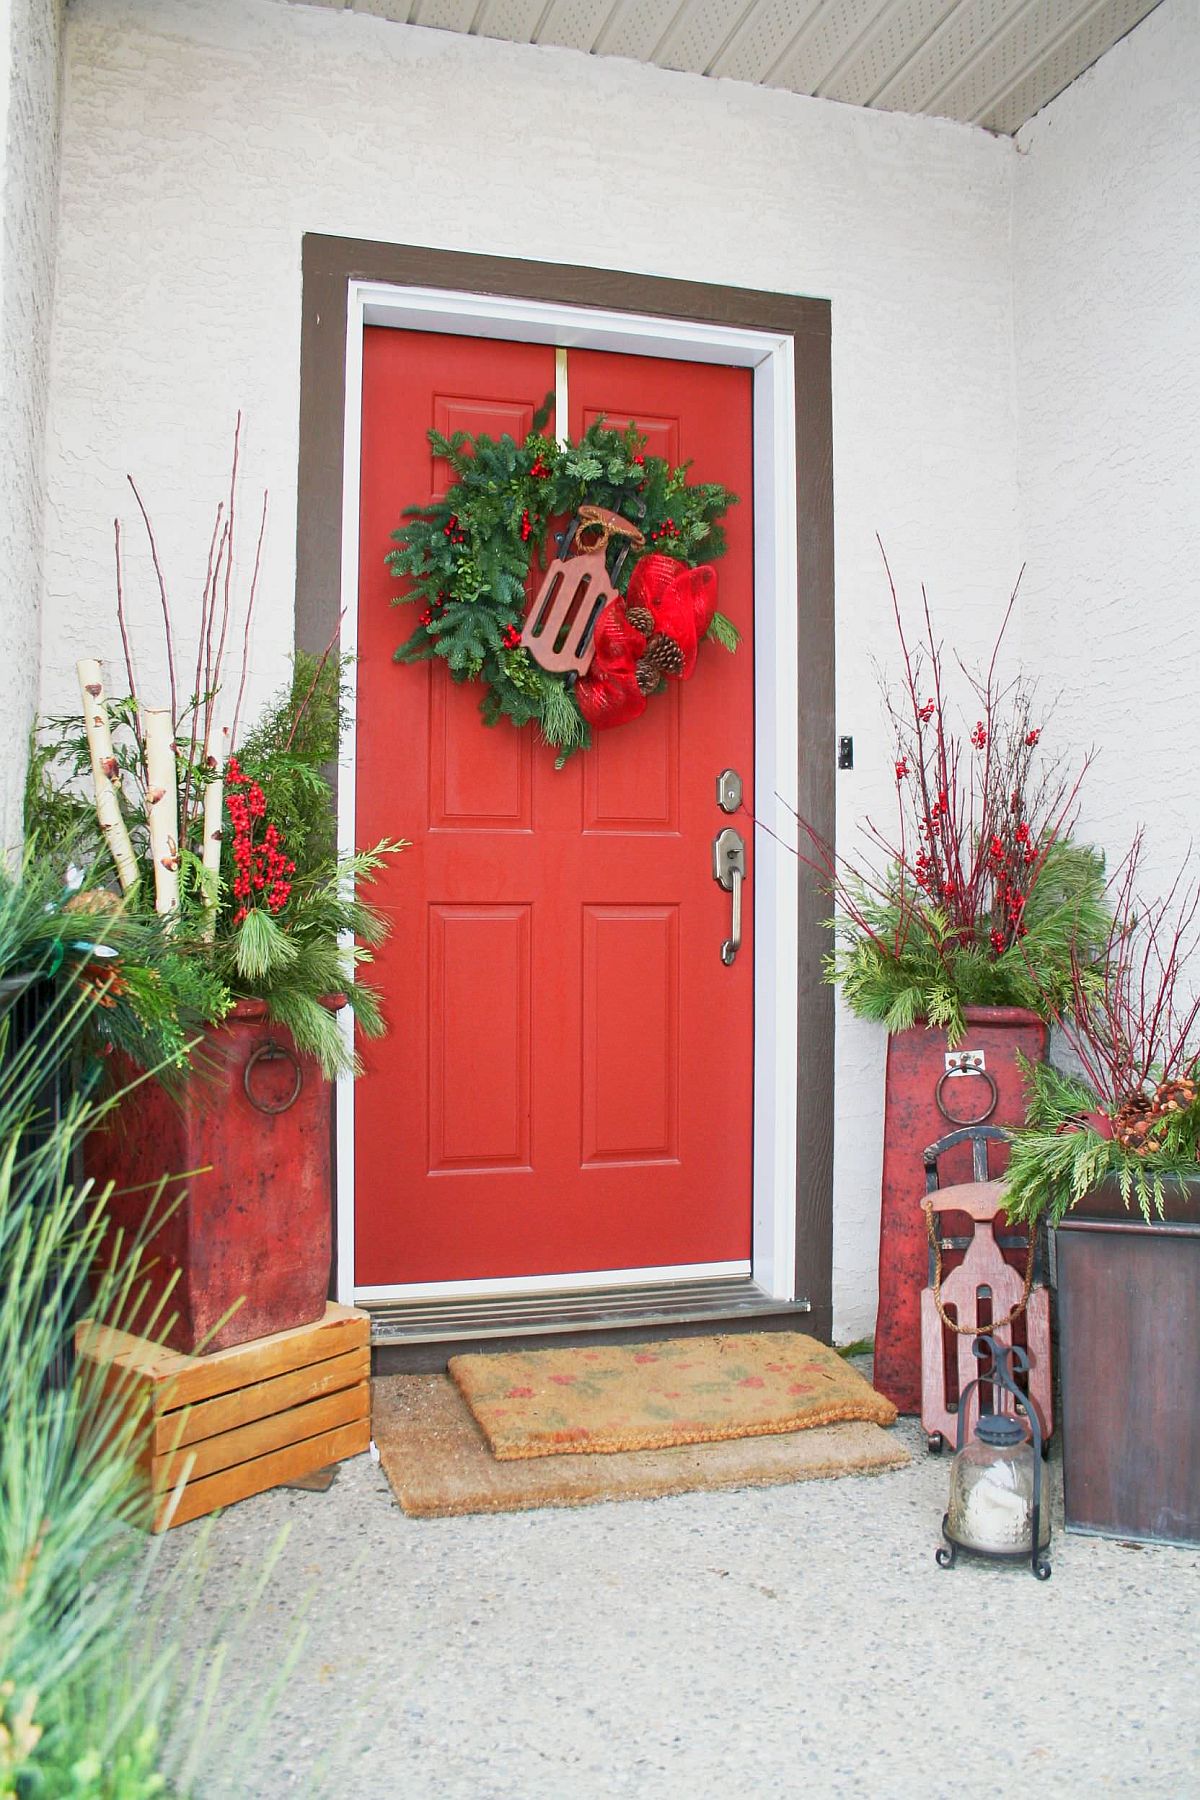 Pops-of-red-added-to-potted-plants-and-a-simple-green-wreath-make-a-difference-to-the-holiday-entry-25851